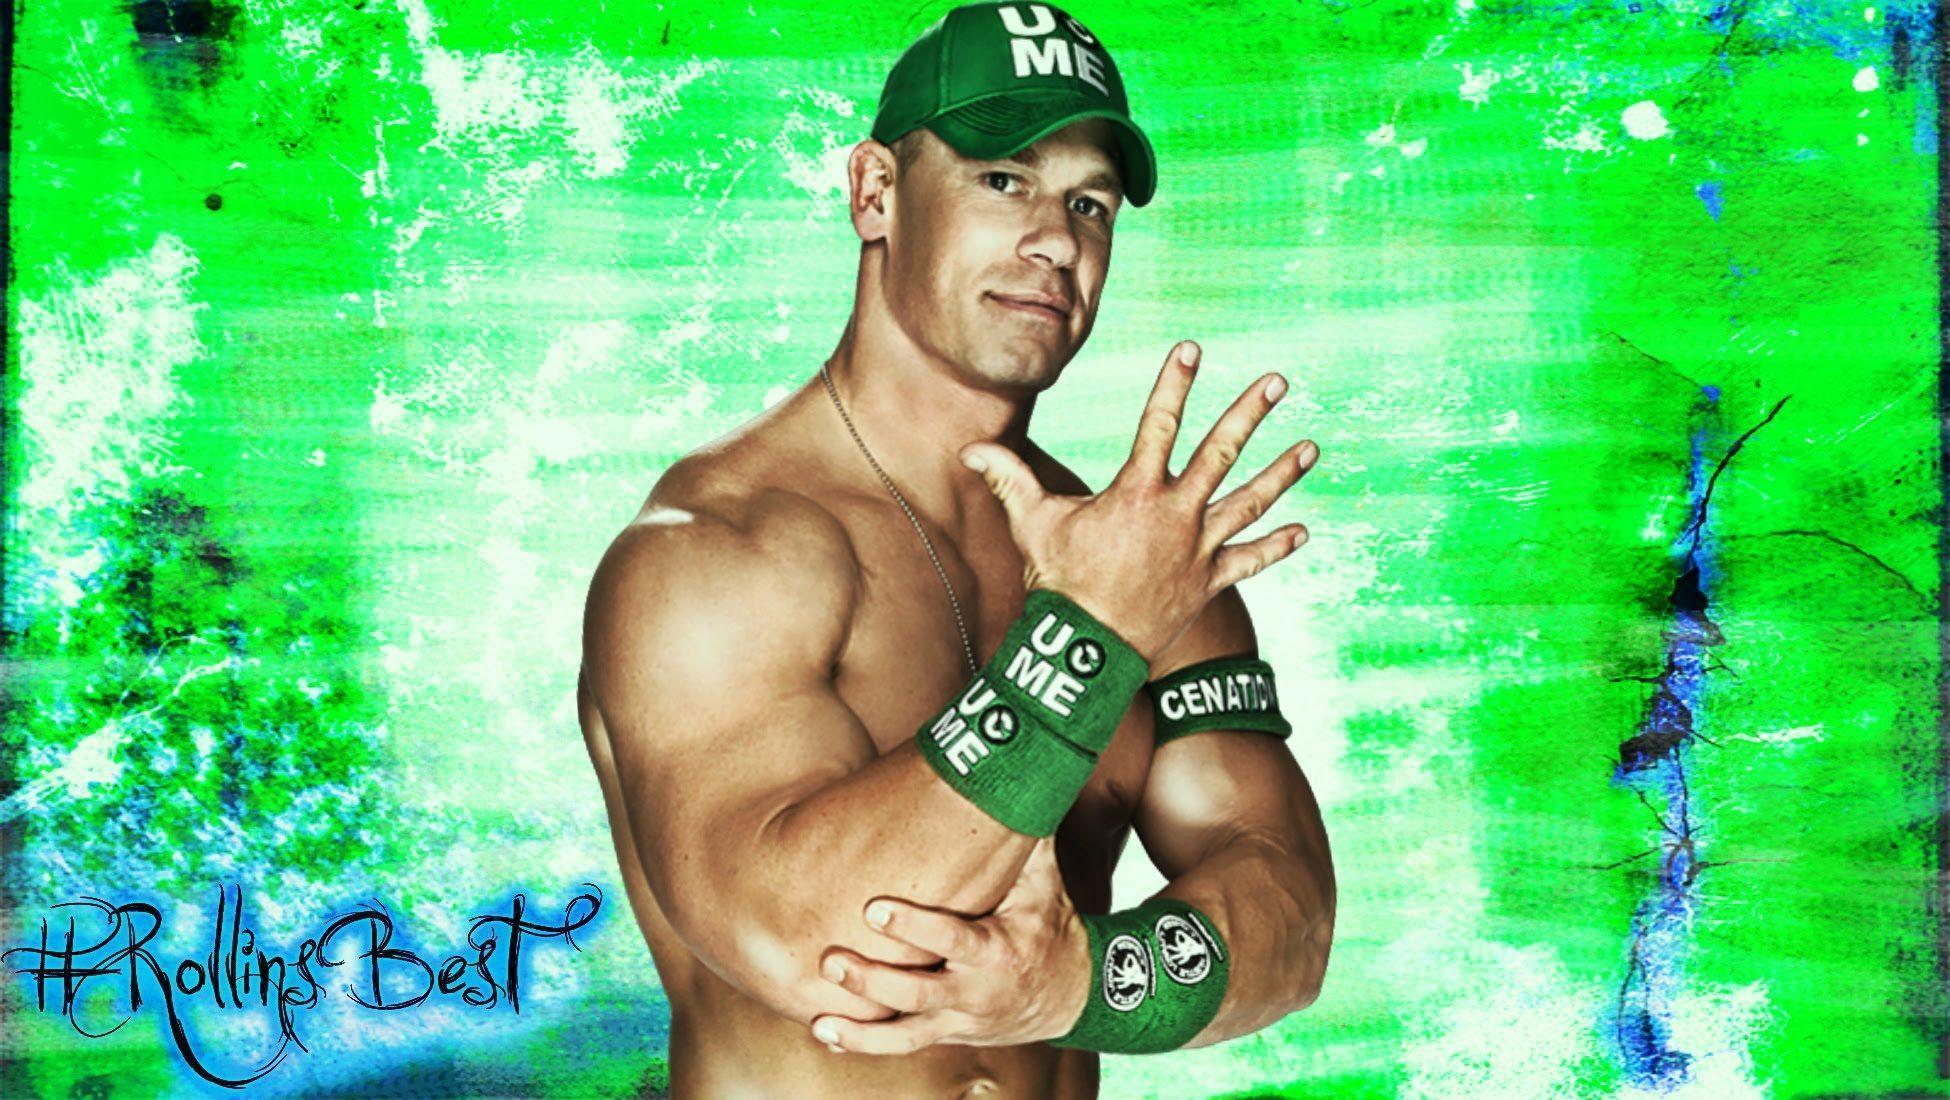 WWE: Jhon Cena Song "My time Is Now" (Green Version) HD